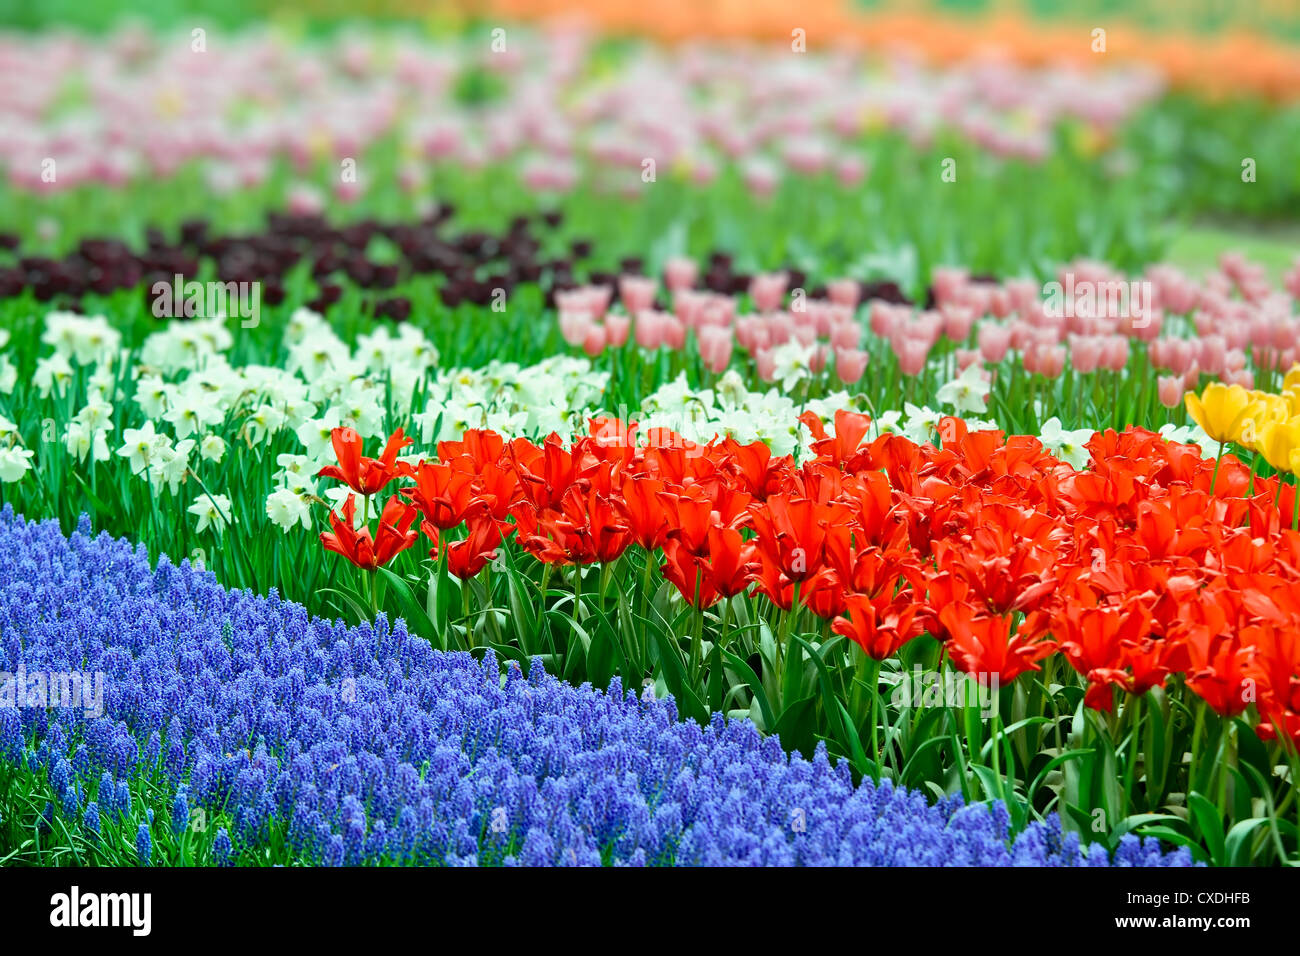 Flower-bed full of color beauty tulips Stock Photo